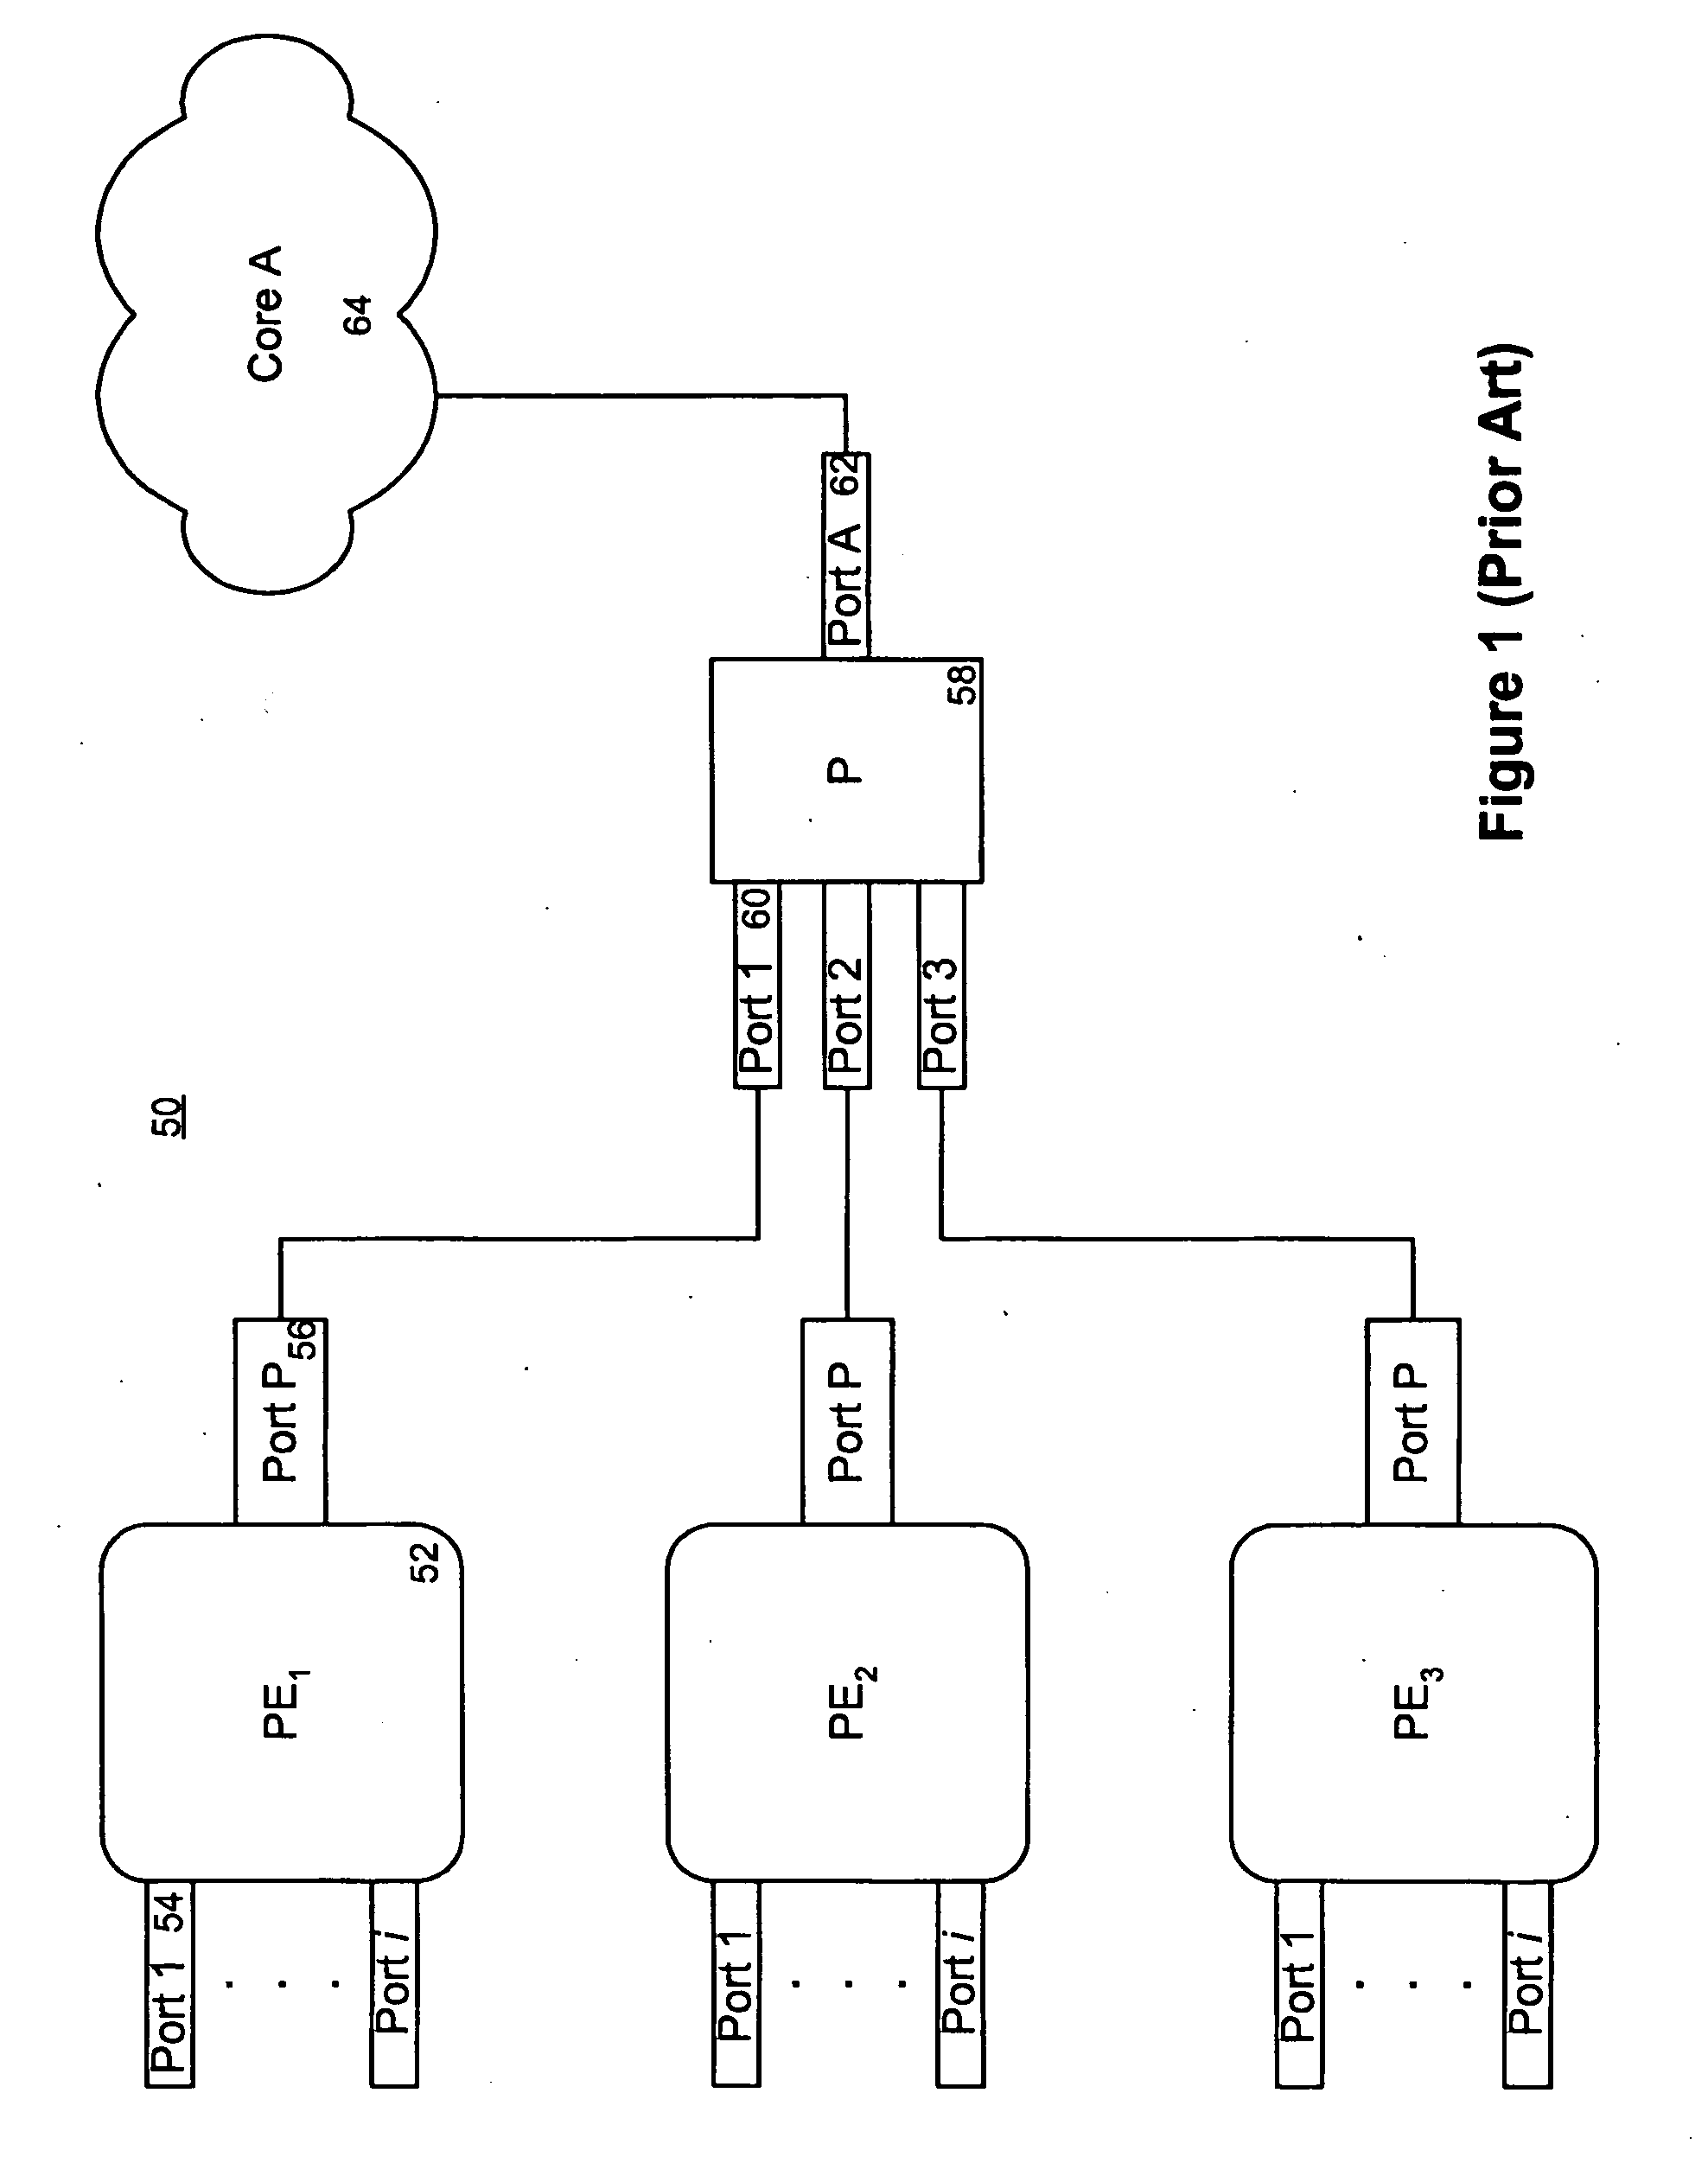 Network visible inter-logical router links